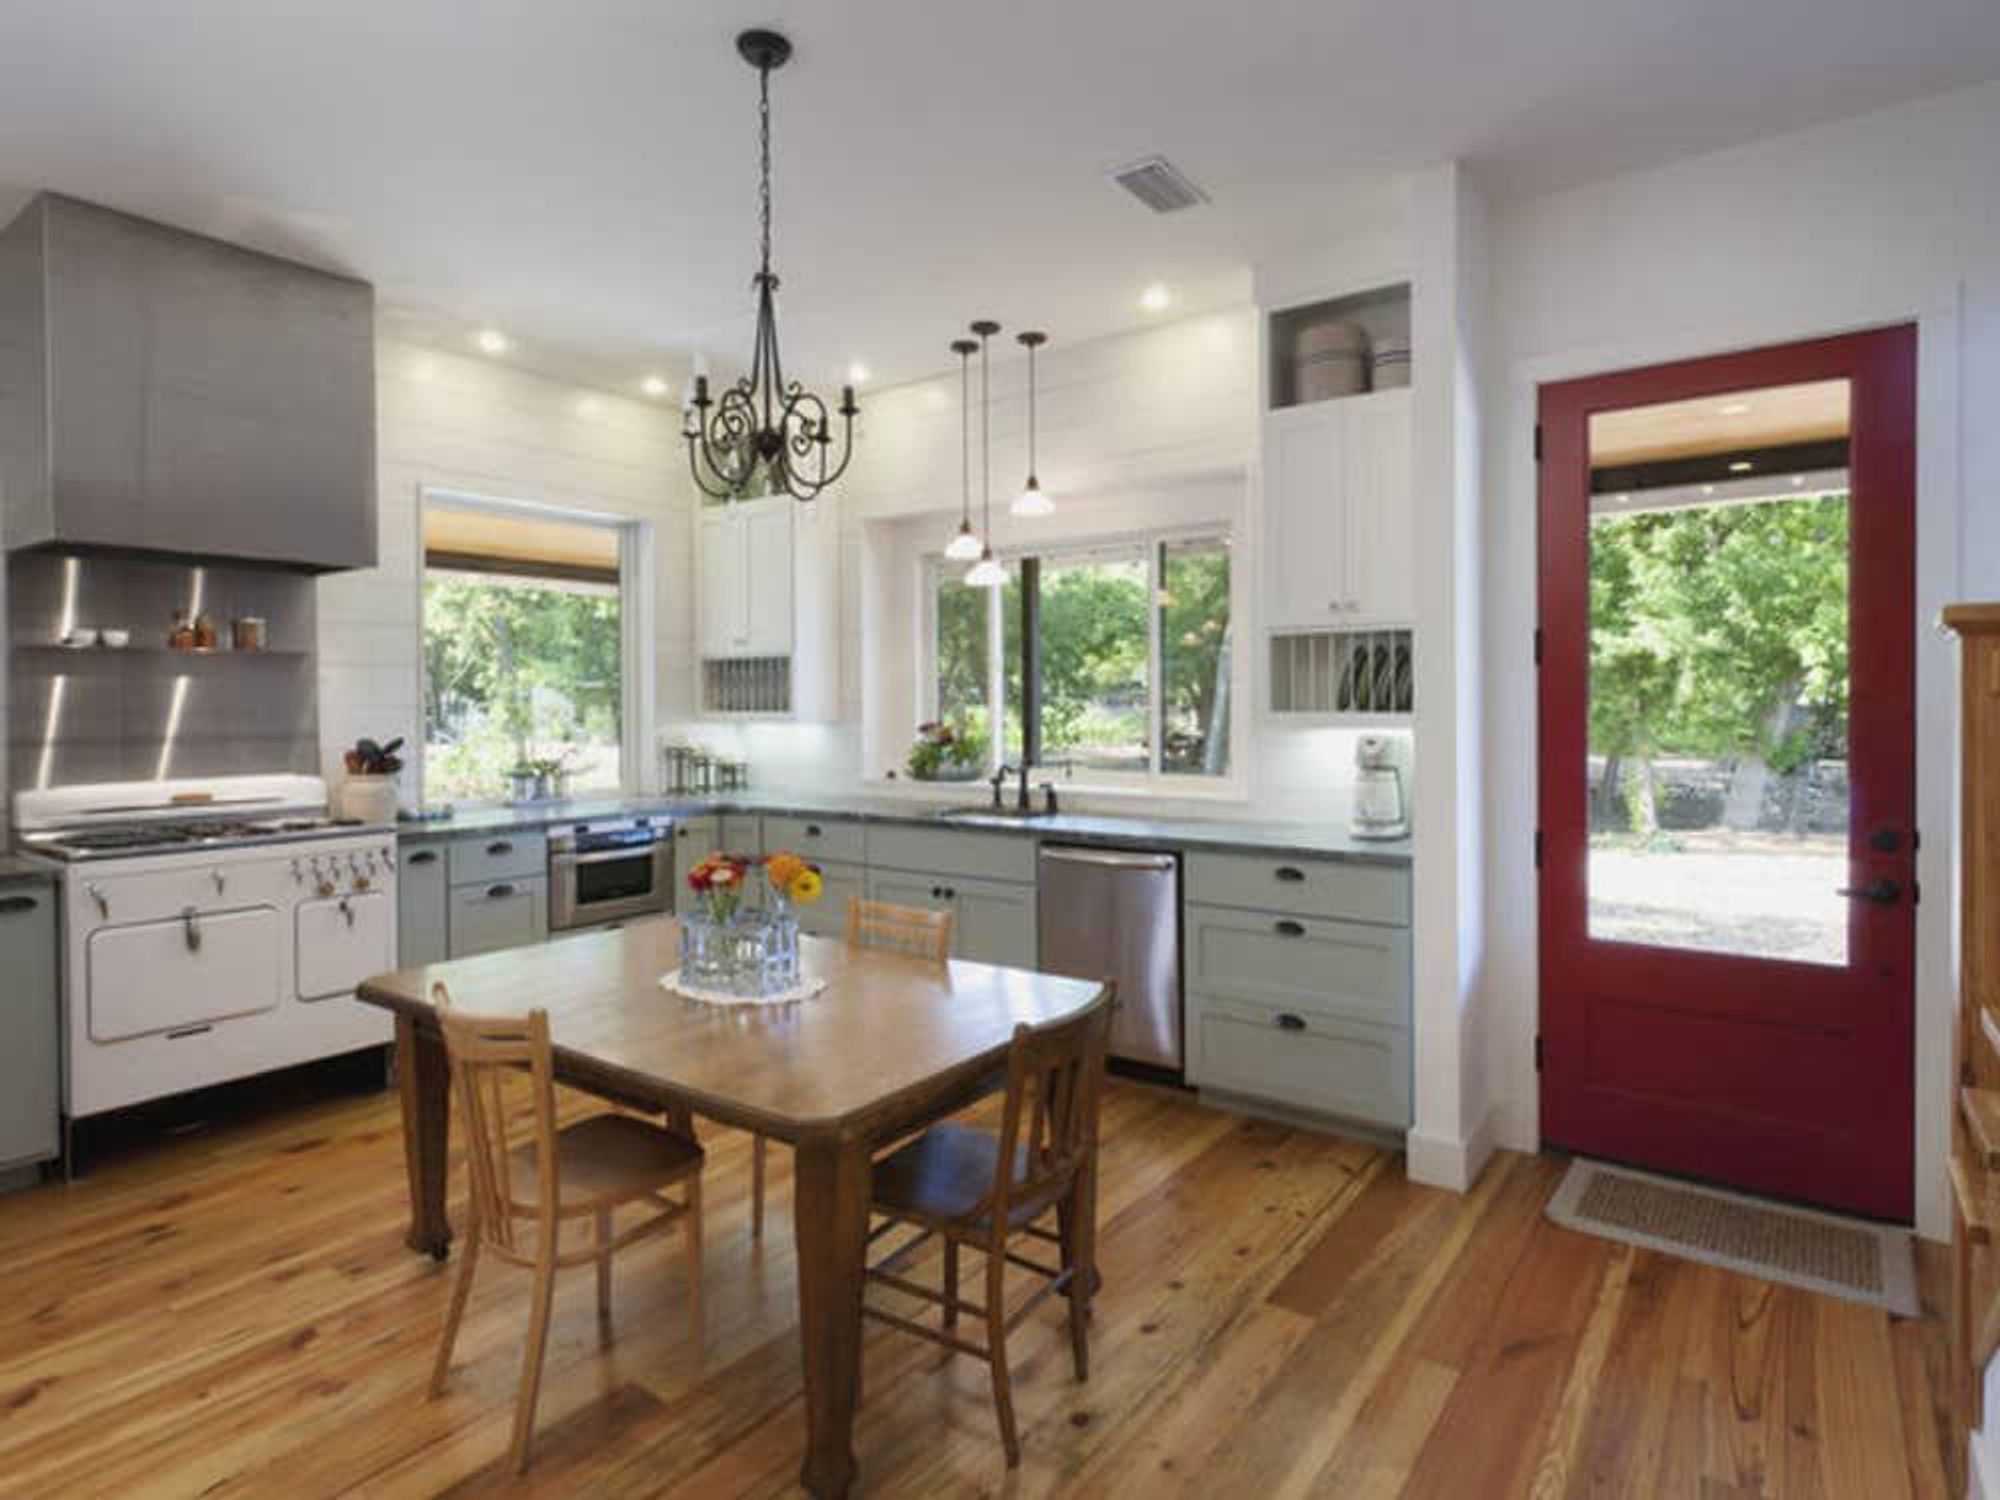 https://dallas.culturemap.com/media-library/houzz-colorful-farmhouse-kitchen.jpg?id=30458791&width=2000&height=1500&quality=85&coordinates=0%2C0%2C0%2C0